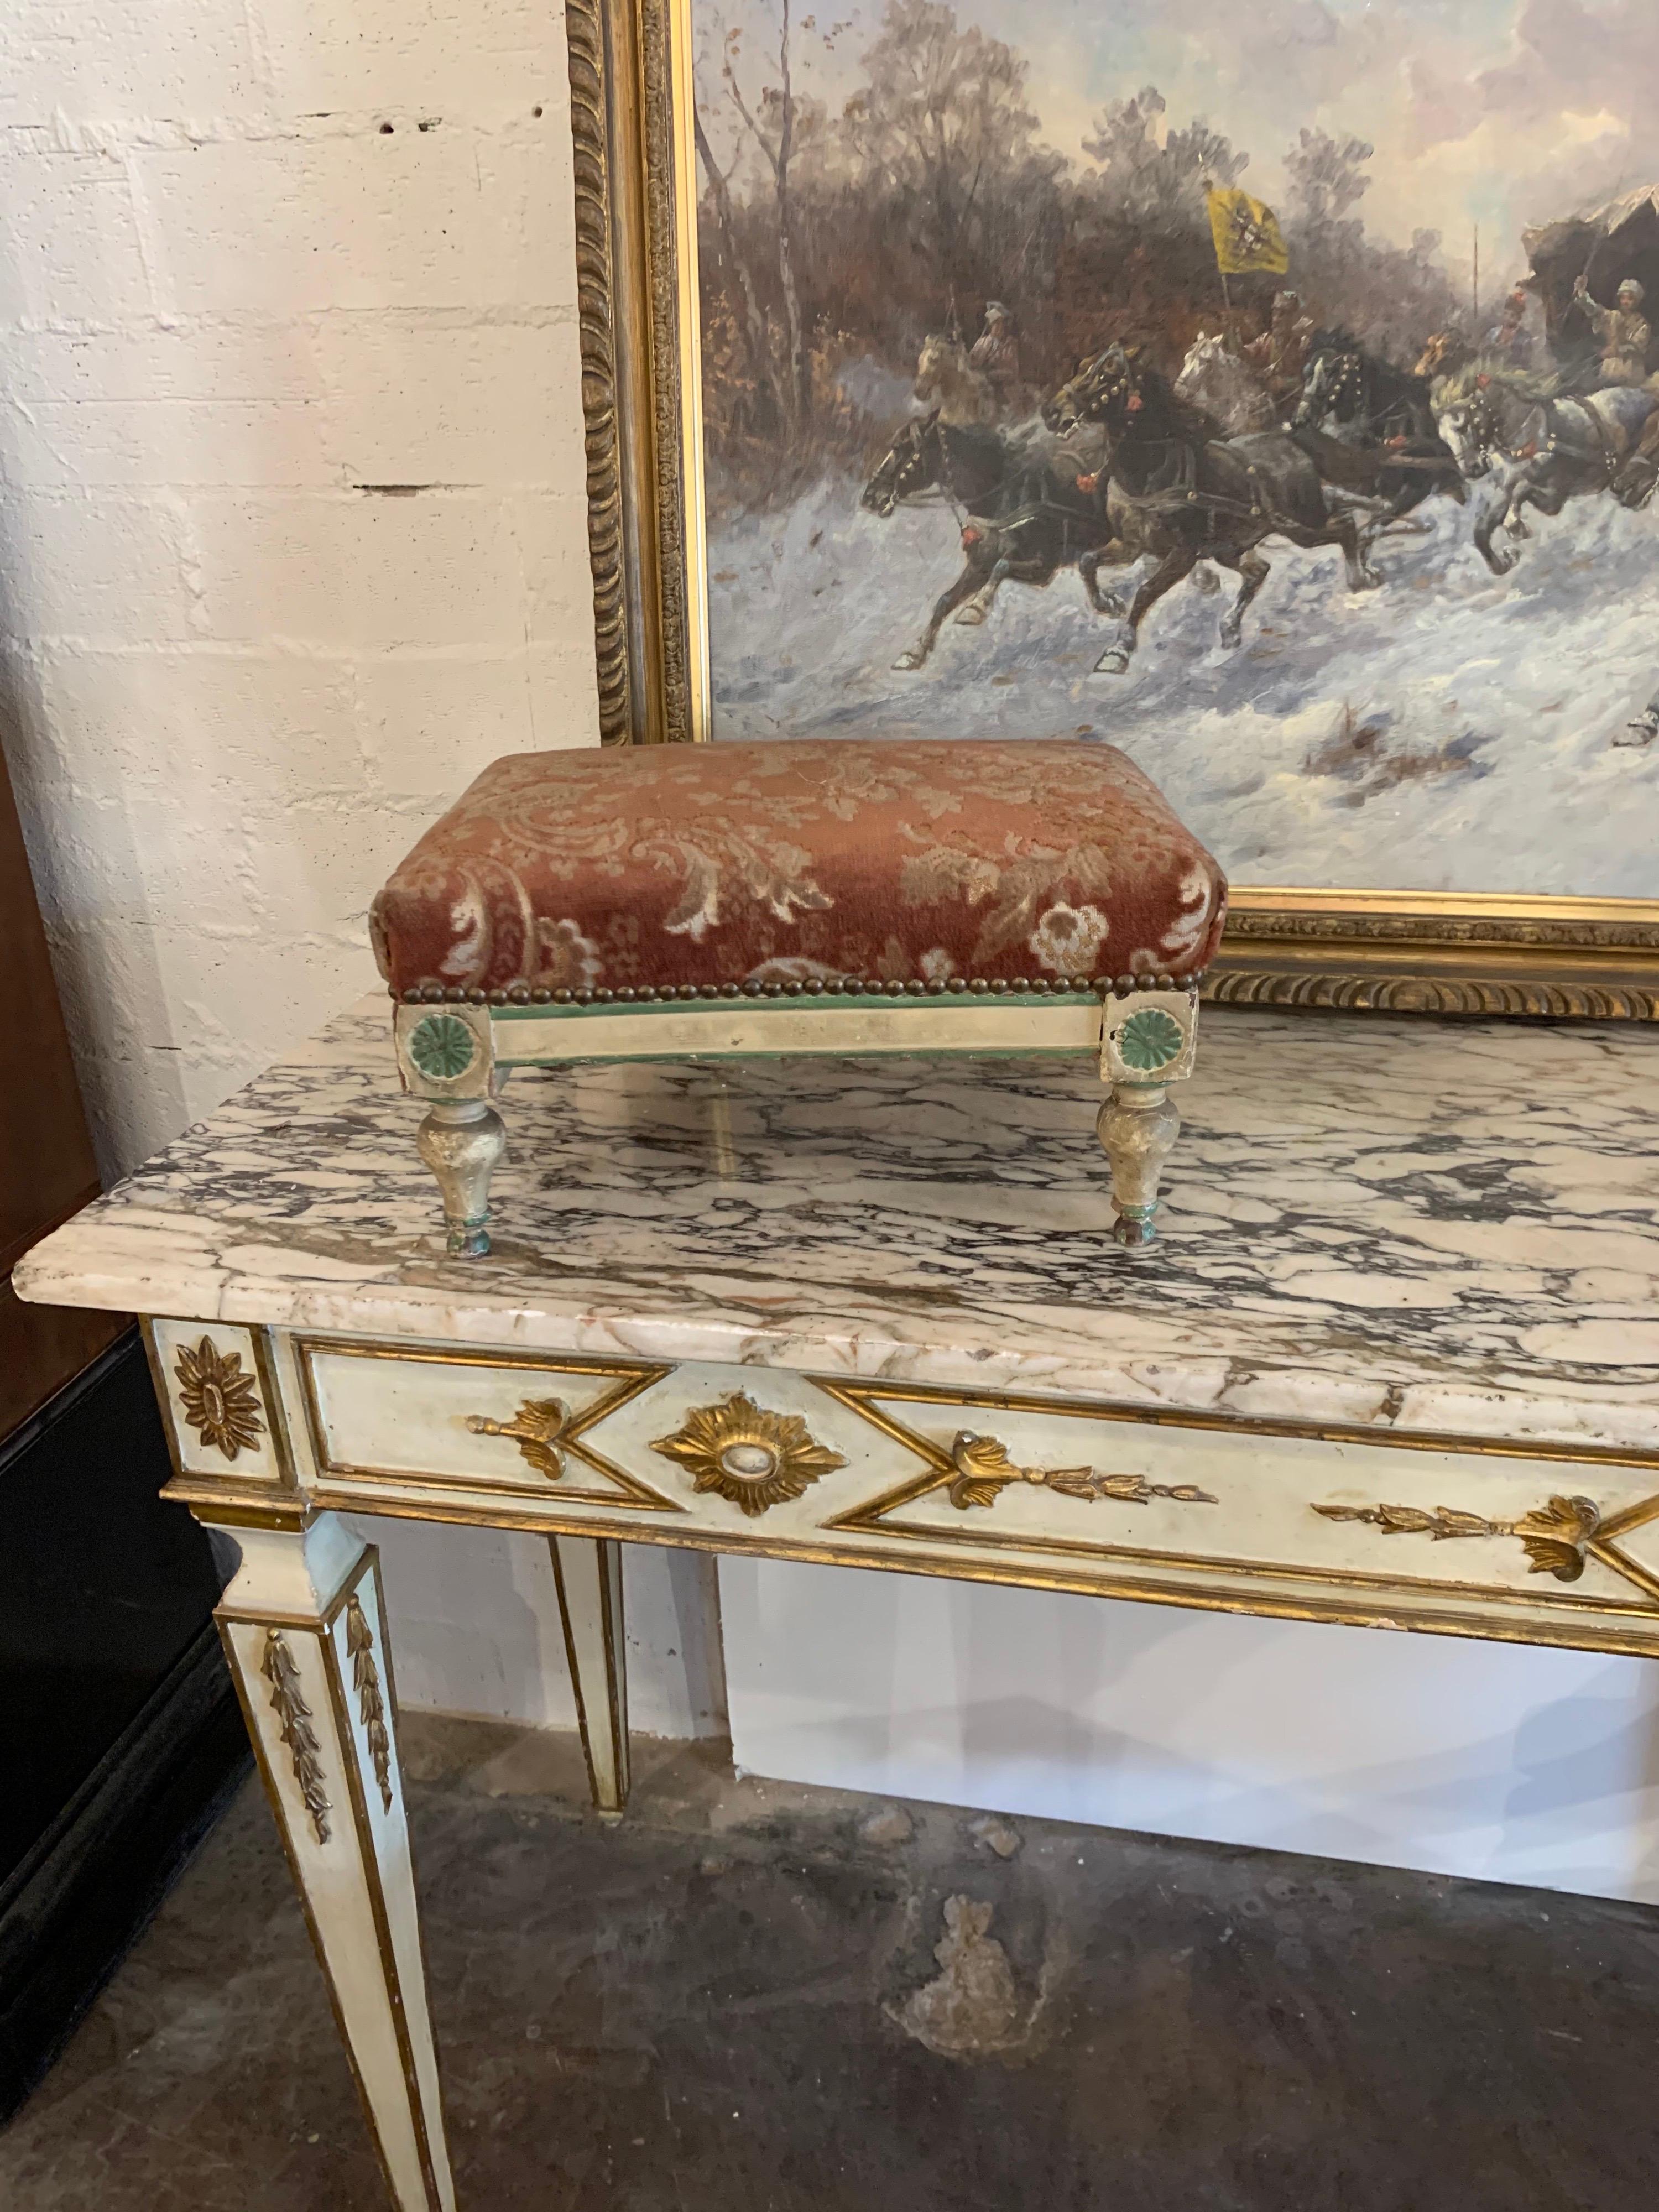 Decorative 19th century French carved and painted Directoire' style foot stool. Upholstered in a beautiful rust colored floral fabric. A very fine accessory!